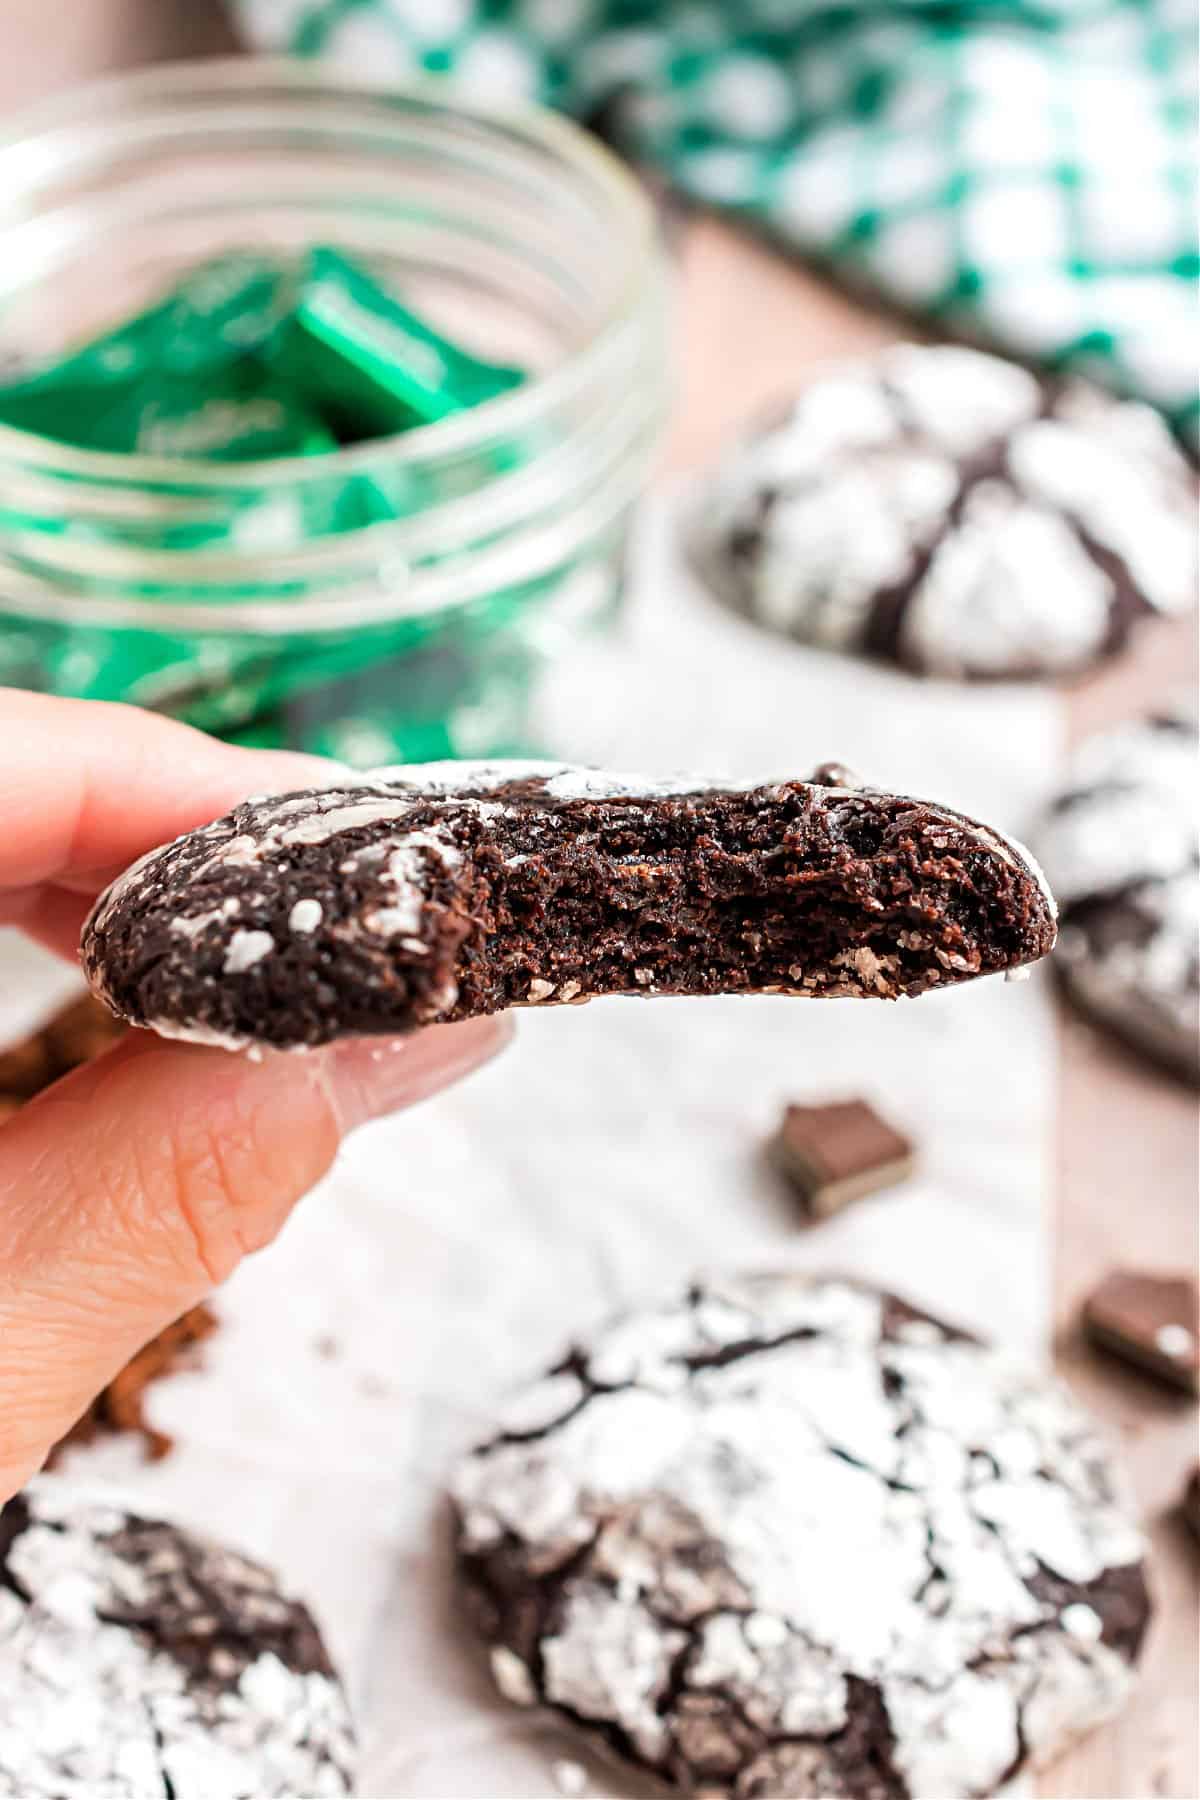 Minty chocolate crinkle cookie with a bite taken out.